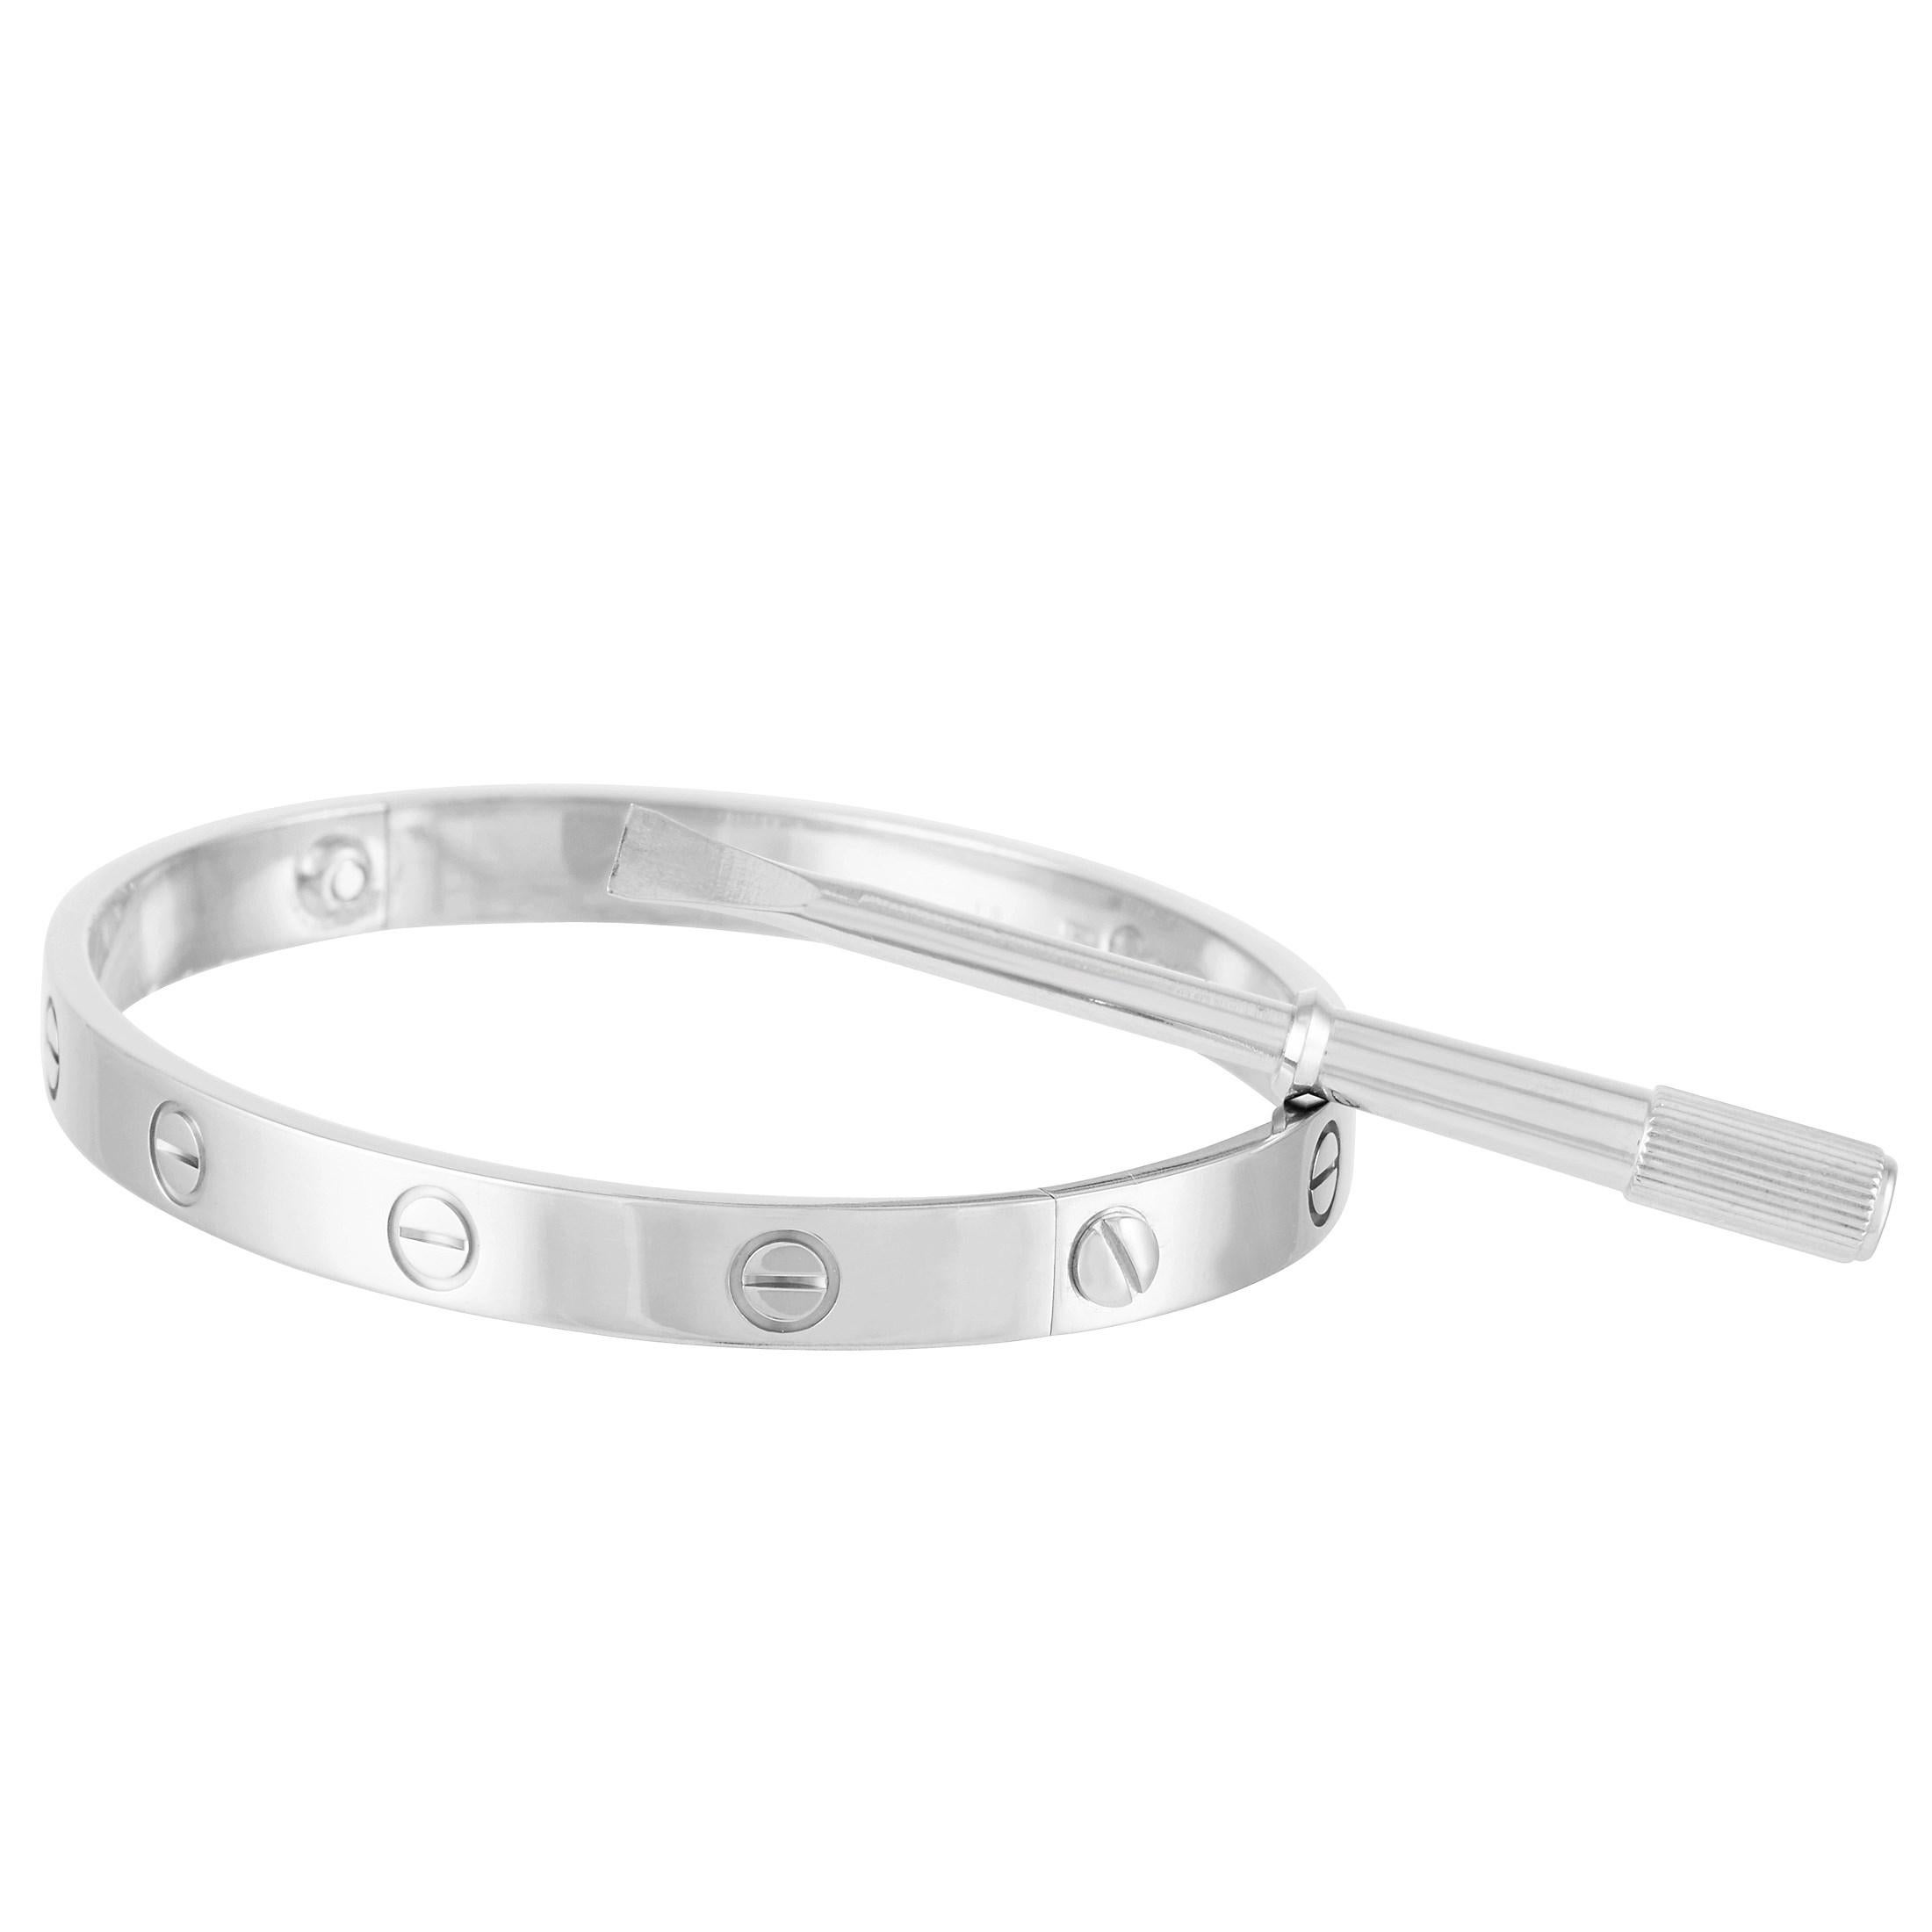 This Cartier Love 18K White Gold Bangle Bracelet is a classic Cartier piece, the bangle measures 7.1 inches in diameter and is set with the signature Cartier de Santos screws throughout. The bangle weighs a total of 35.4 grams. 

This bracelet is